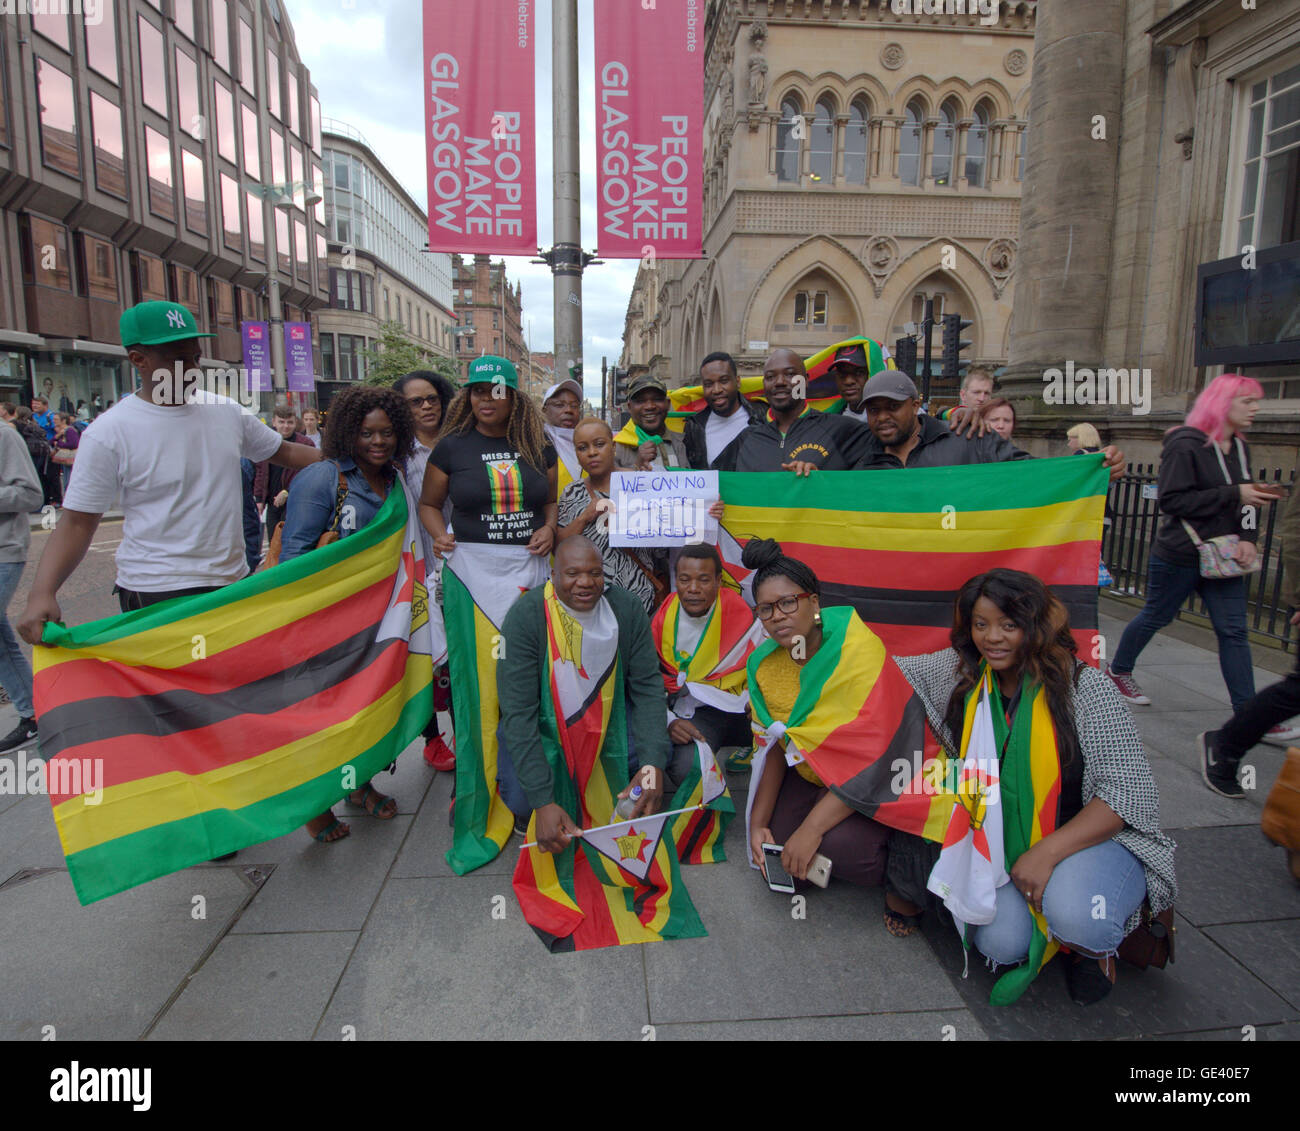 Glasgow, Scotland, UK 23rd  July 2016. Scotland’s Zimbabwean community gathered together in Glasgow today to support an international protest against the corruption in their home country of Zimbabwe. Chanting “Enough is enough!', they along with their fellow countrymen abroad, 50  Scottish residents joined the world wide protest organised through social media against the government and their president Robert Mugabe Credit:  Gerard Ferry/Alamy Live News Stock Photo